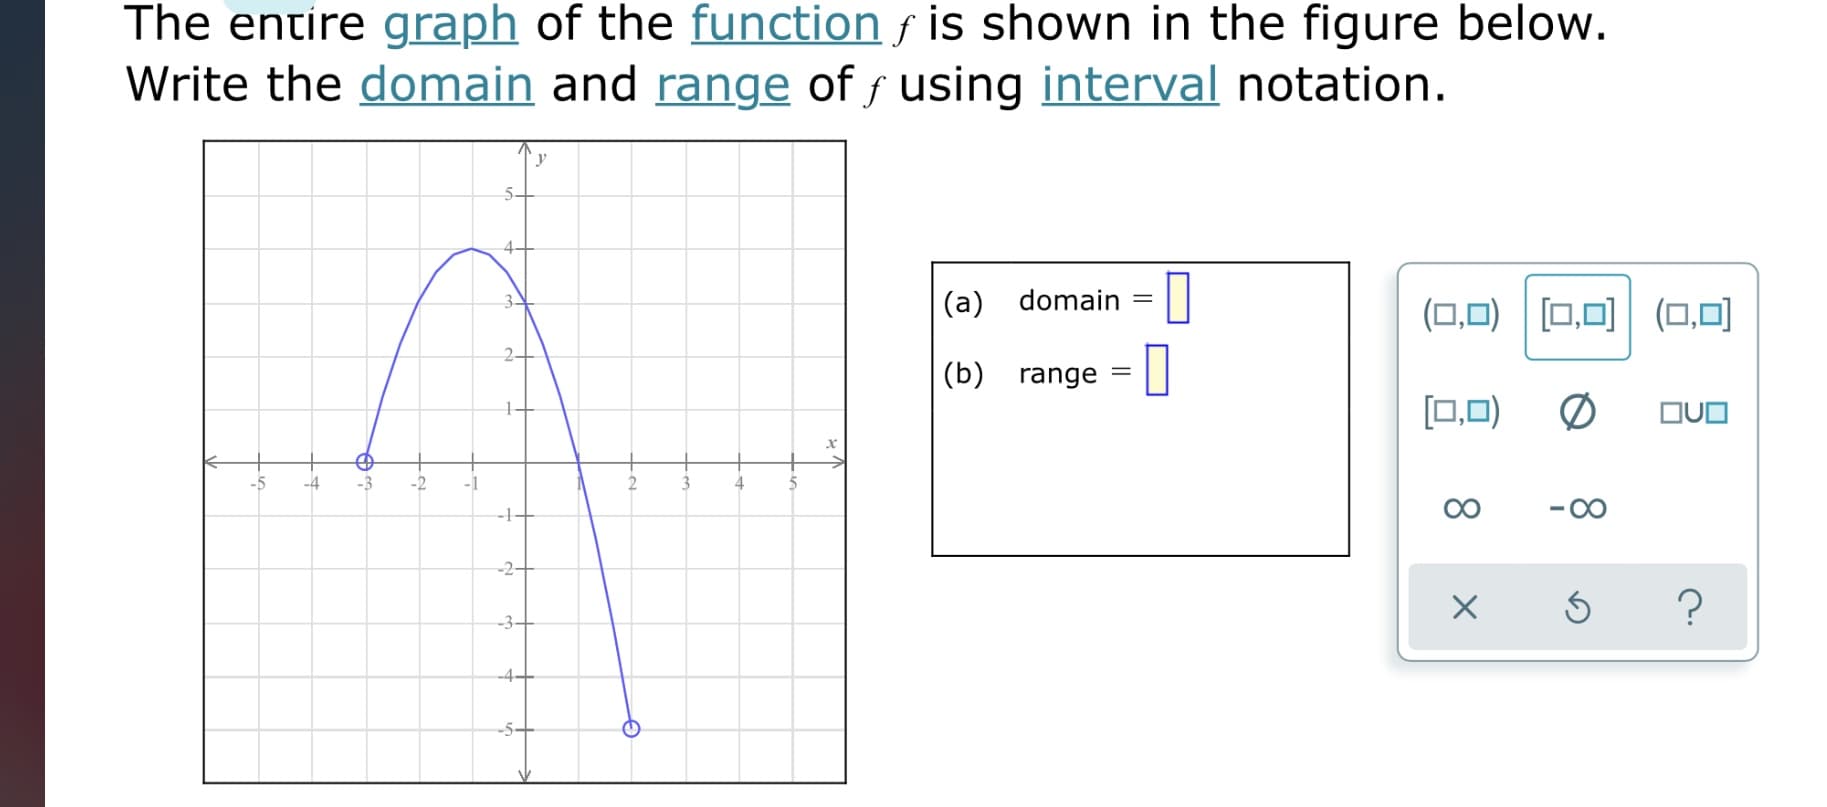 The entire graph of the function f is shown in the figure below.
Write the domain and range of f using interval notation.
3-
(a) domain
(ロ,口)|回回(口,口]
(b) range
[0,0)
の
OUO
-5
-4
-3
-2
-1
4
--1-
-2-
-3+
-4+
--5-
8.
